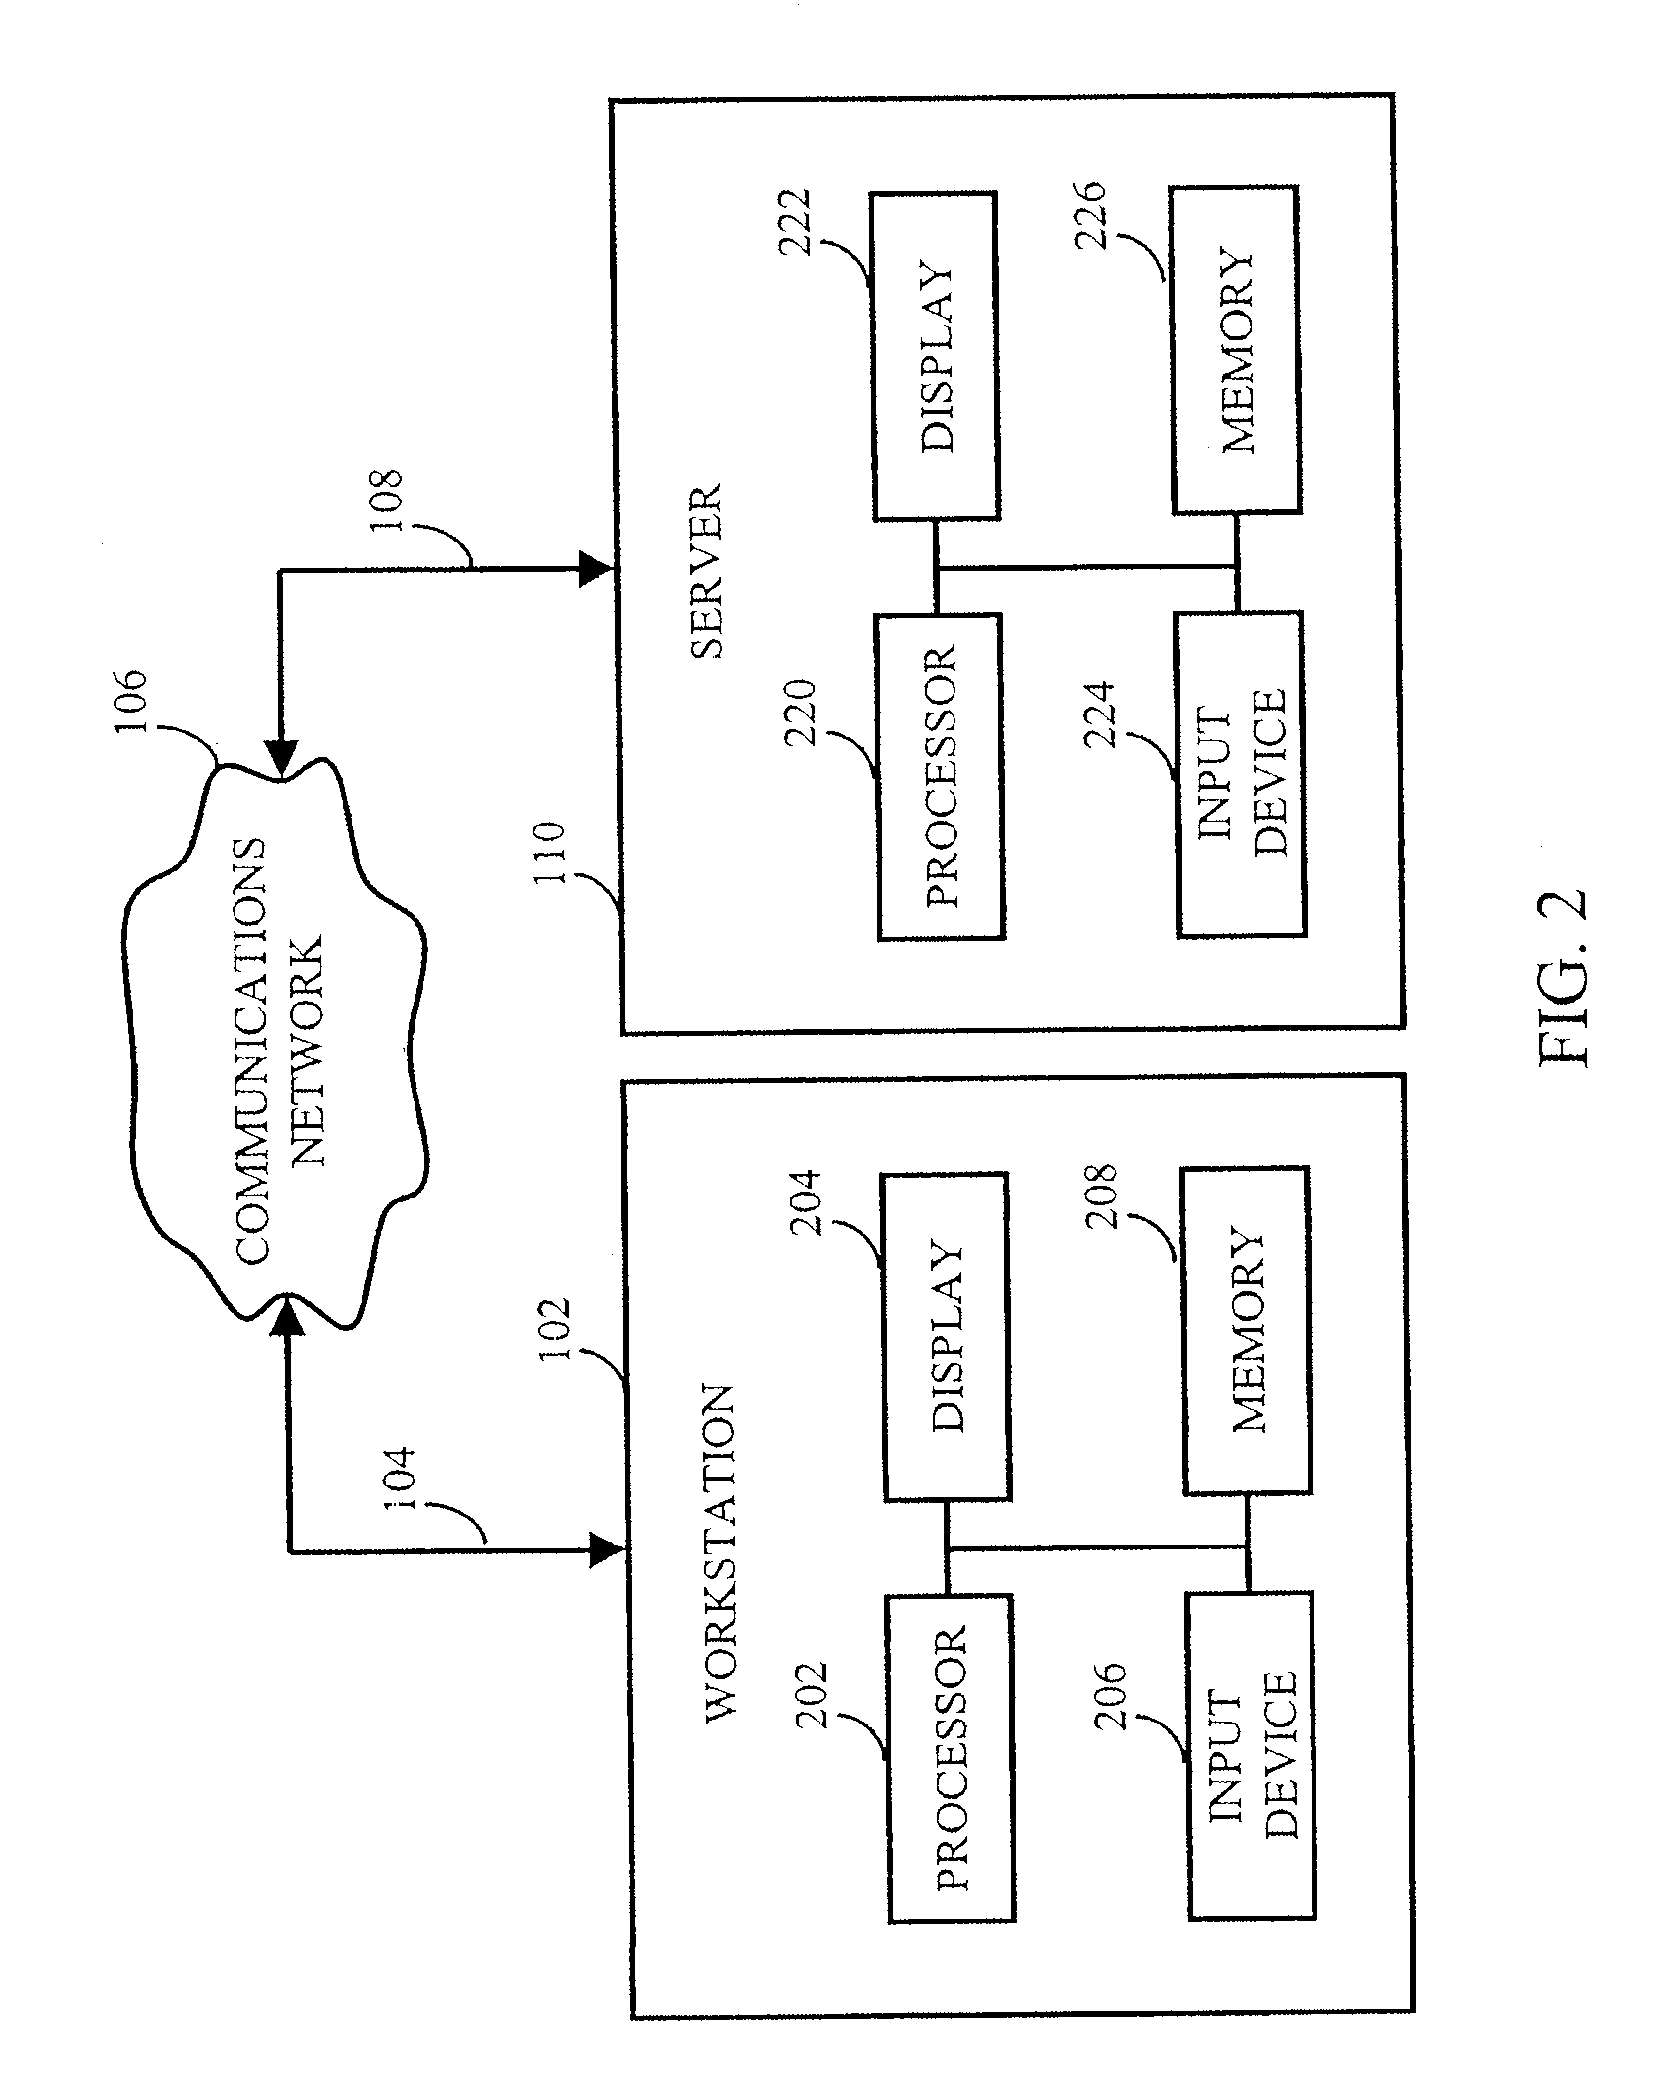 Systems and methods for managing and distributing media content